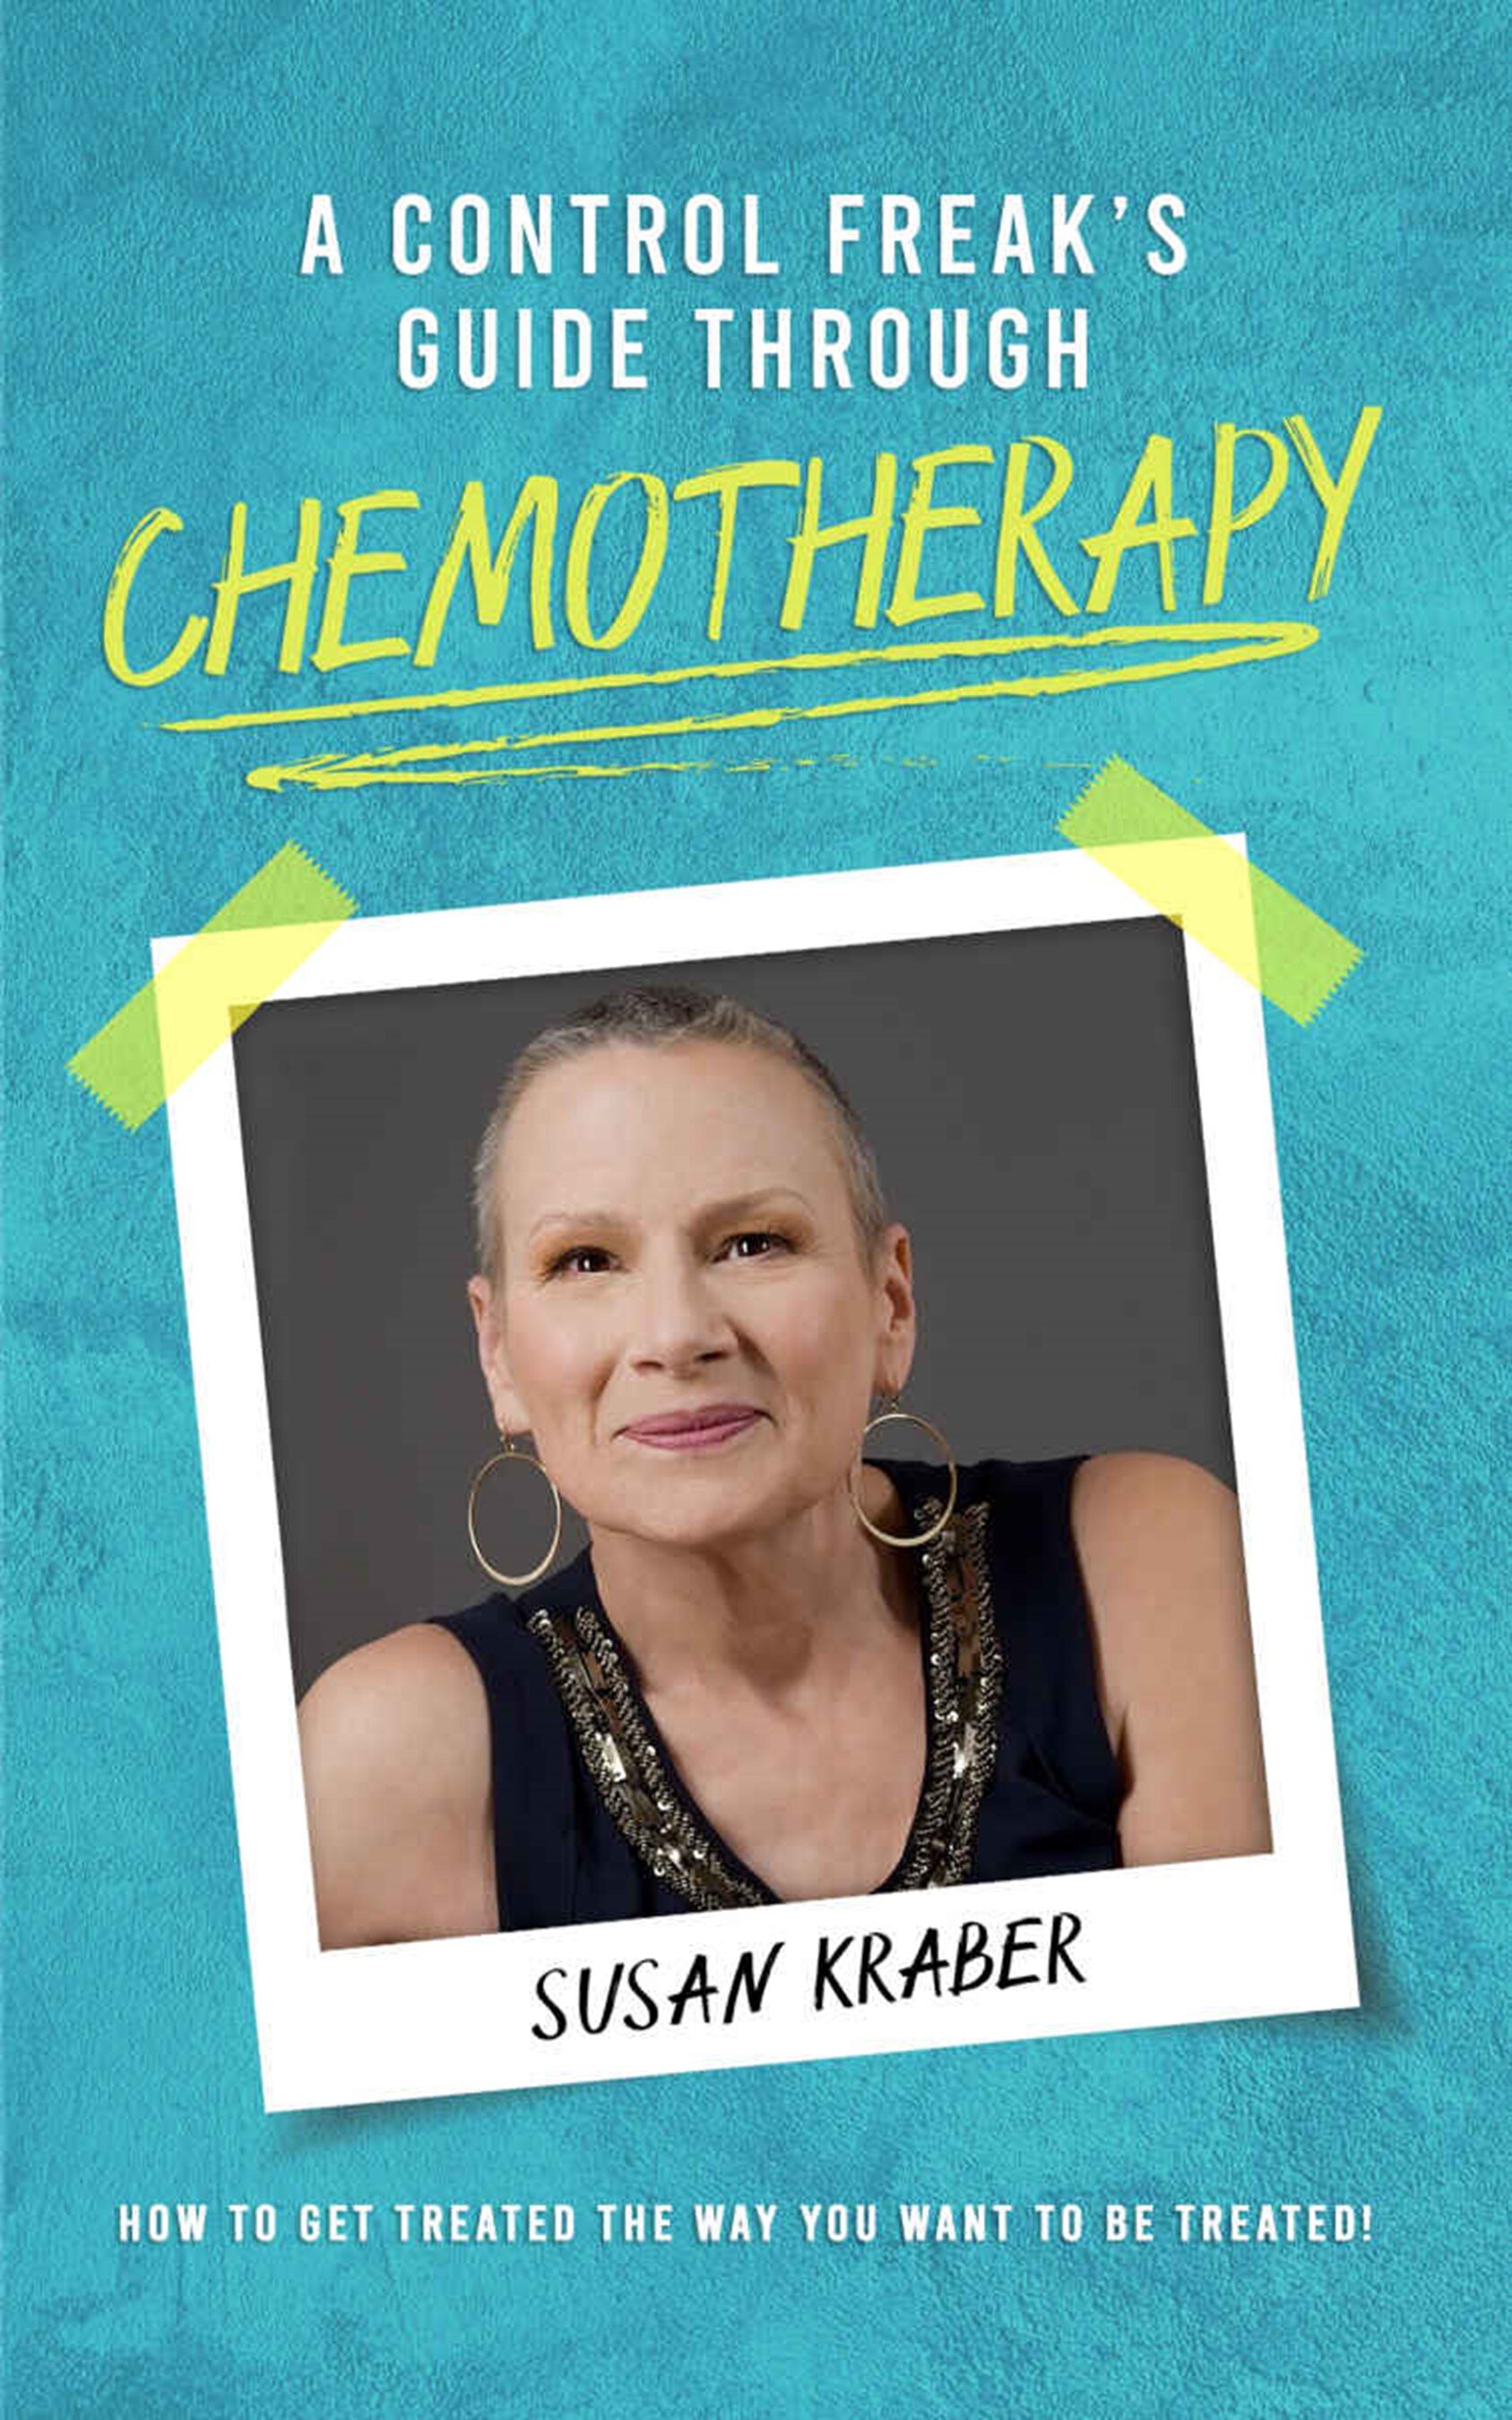 A Control Freak's Guide Through Chemotherapy